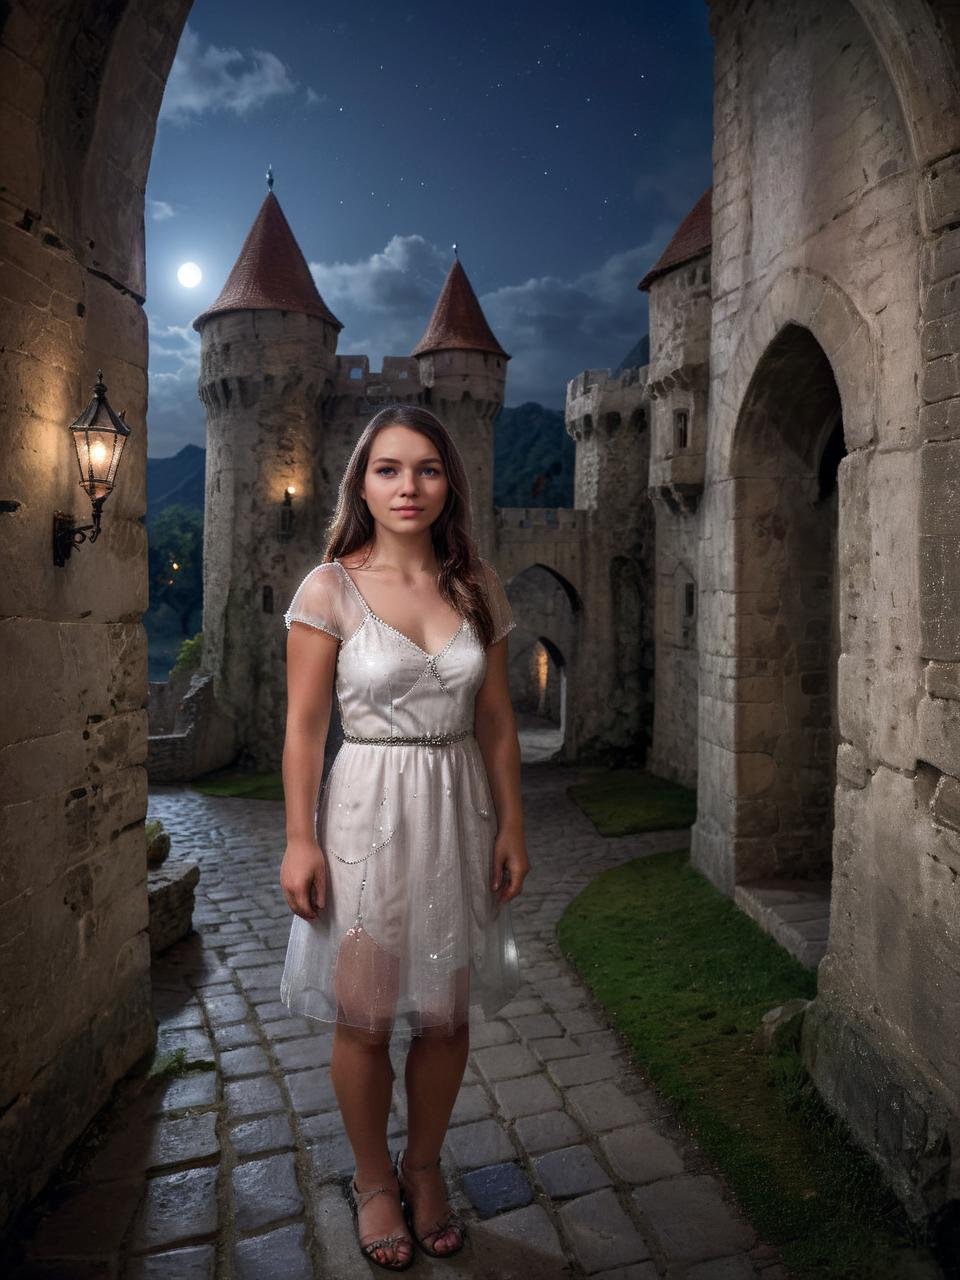 Hyperrealistic art beautiful cute 28 y.o. Vala woman is standing castle's courtyard, wearing white transparent dress,  manor, old castle, stone walls,night   <lora:polyhedron_god rays-000007:0.6>  <lora:Castle_manor:0.8>  <lora:Vanilka:0.9> . Extremely high-resolution details, photographic, realism pushed to extreme, fine texture, incredibly lifelike